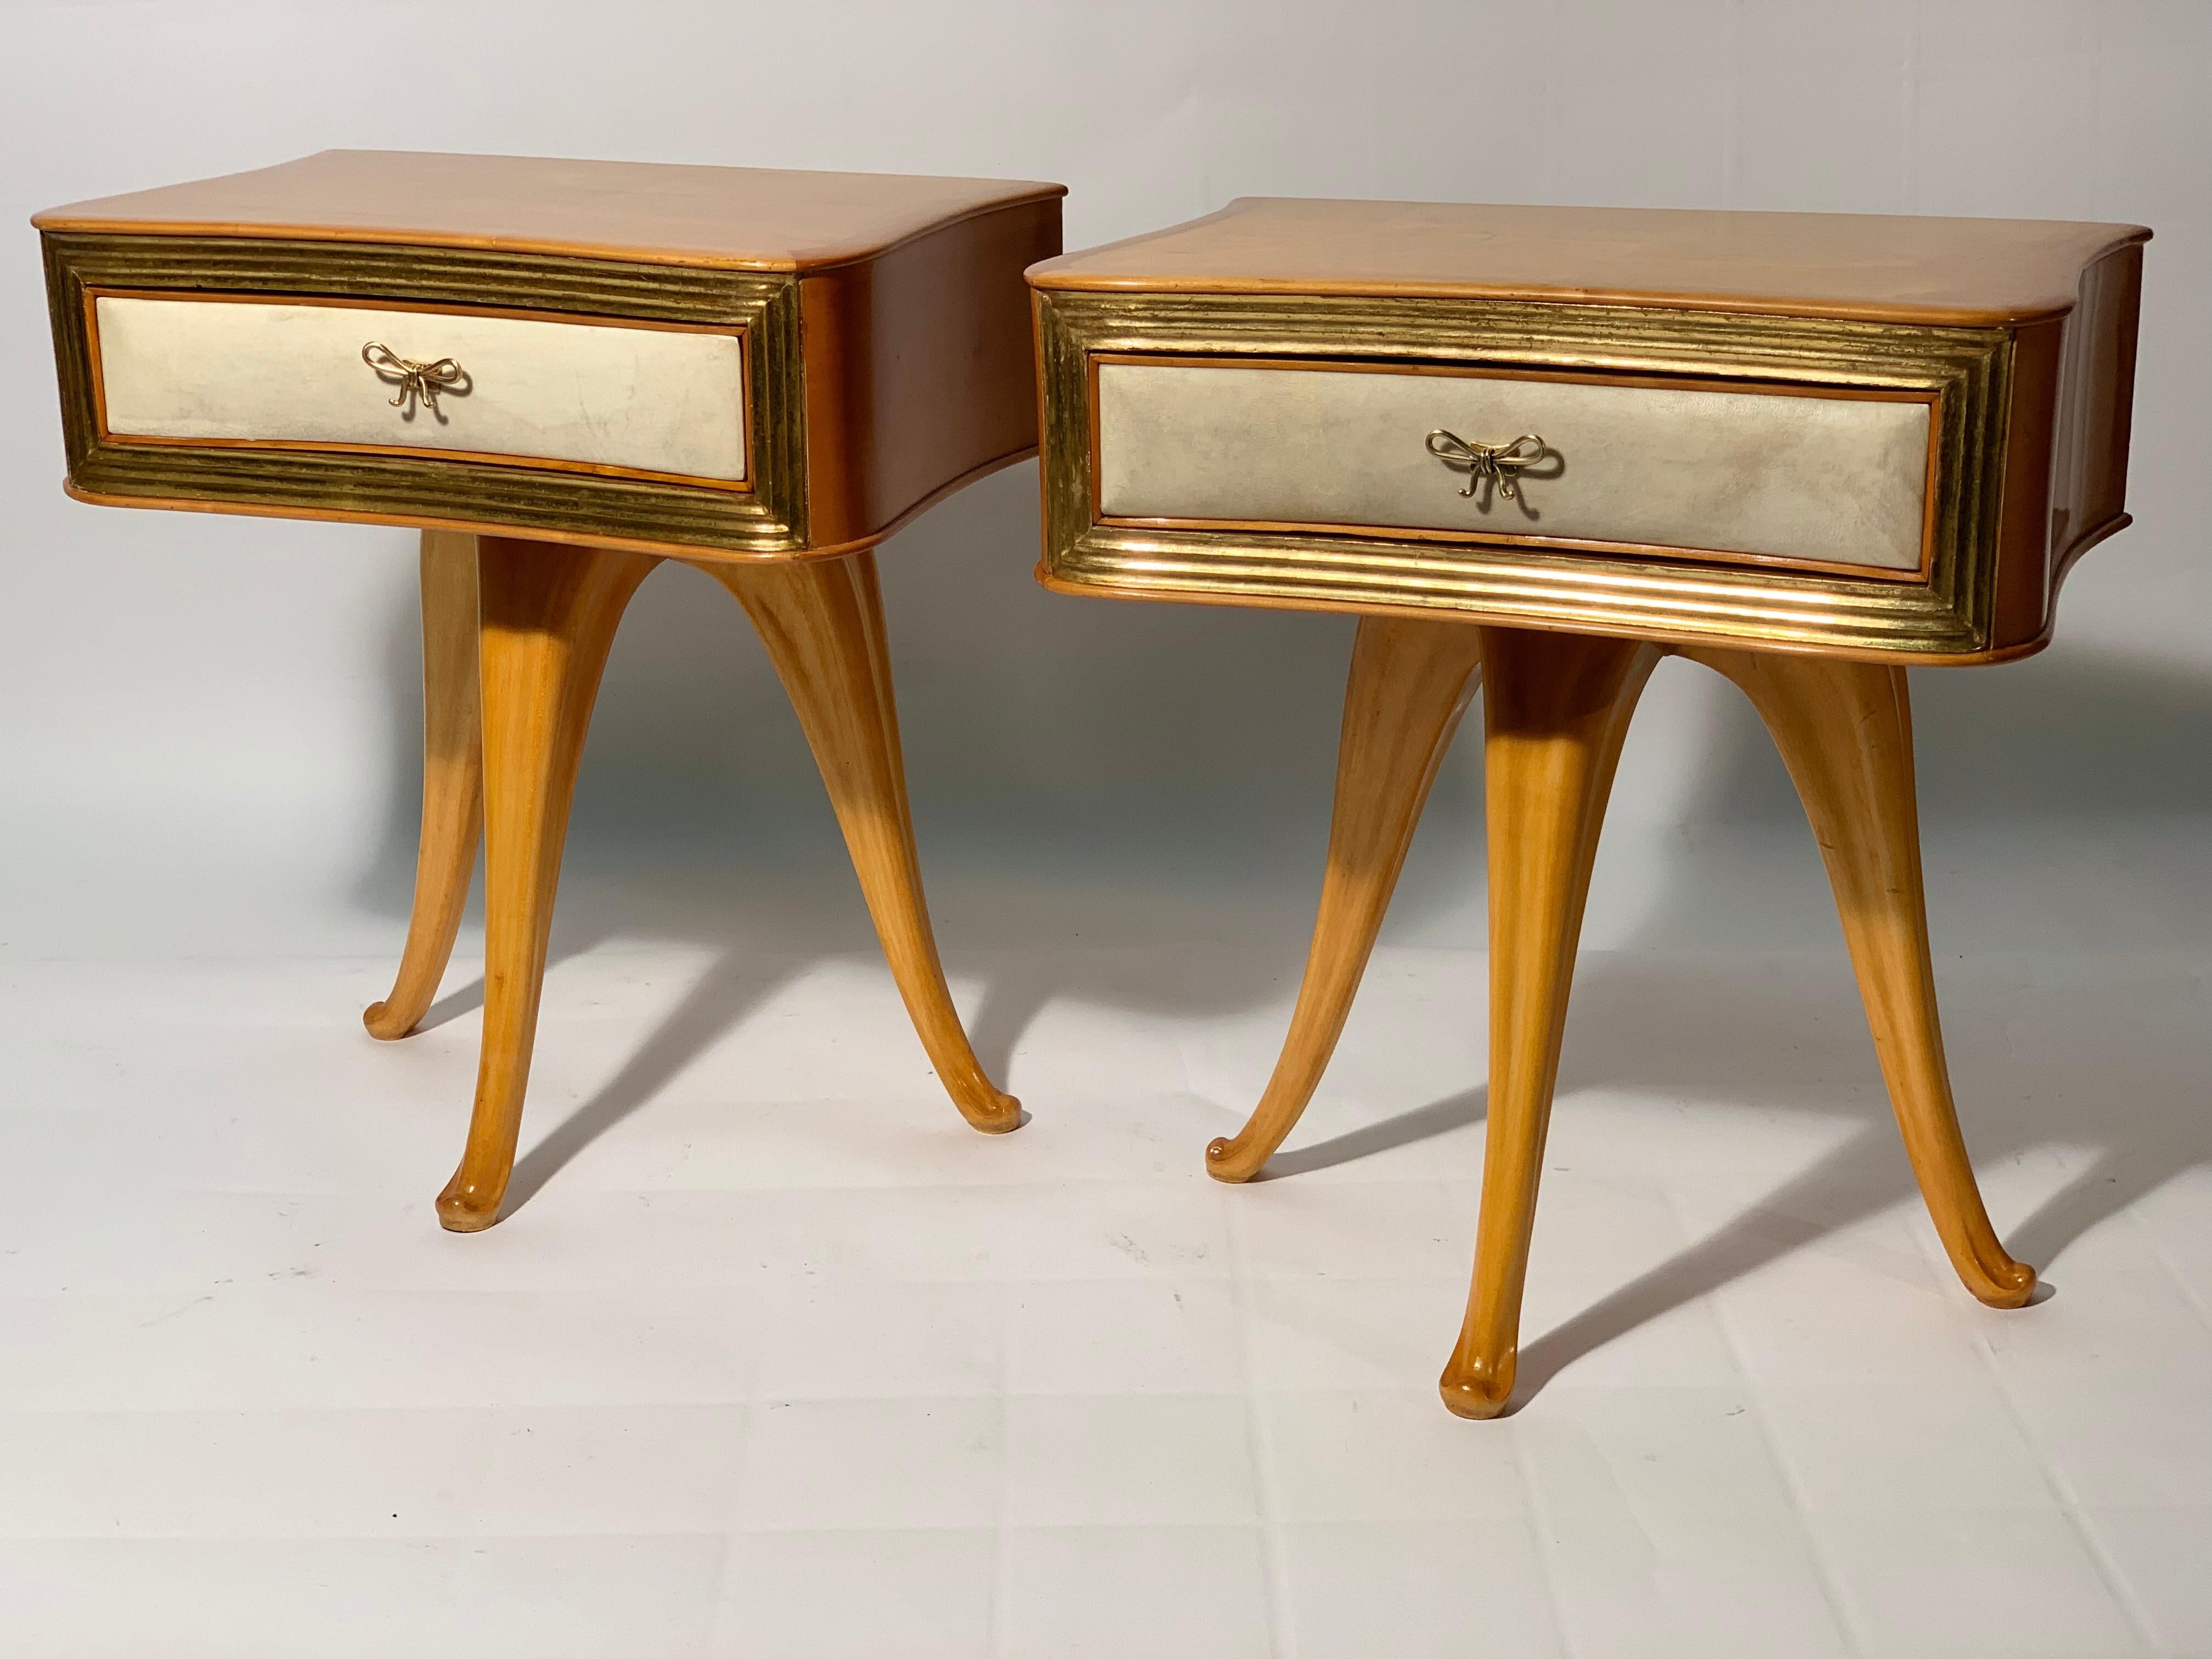 Night stands or side table in solid sculptured maples 3 legs structures, convex and concave drawer in the central part covered in natural parchment and framed with grooved decorative details in real gold leaf.
Beautiful bow-shaped handles in cast